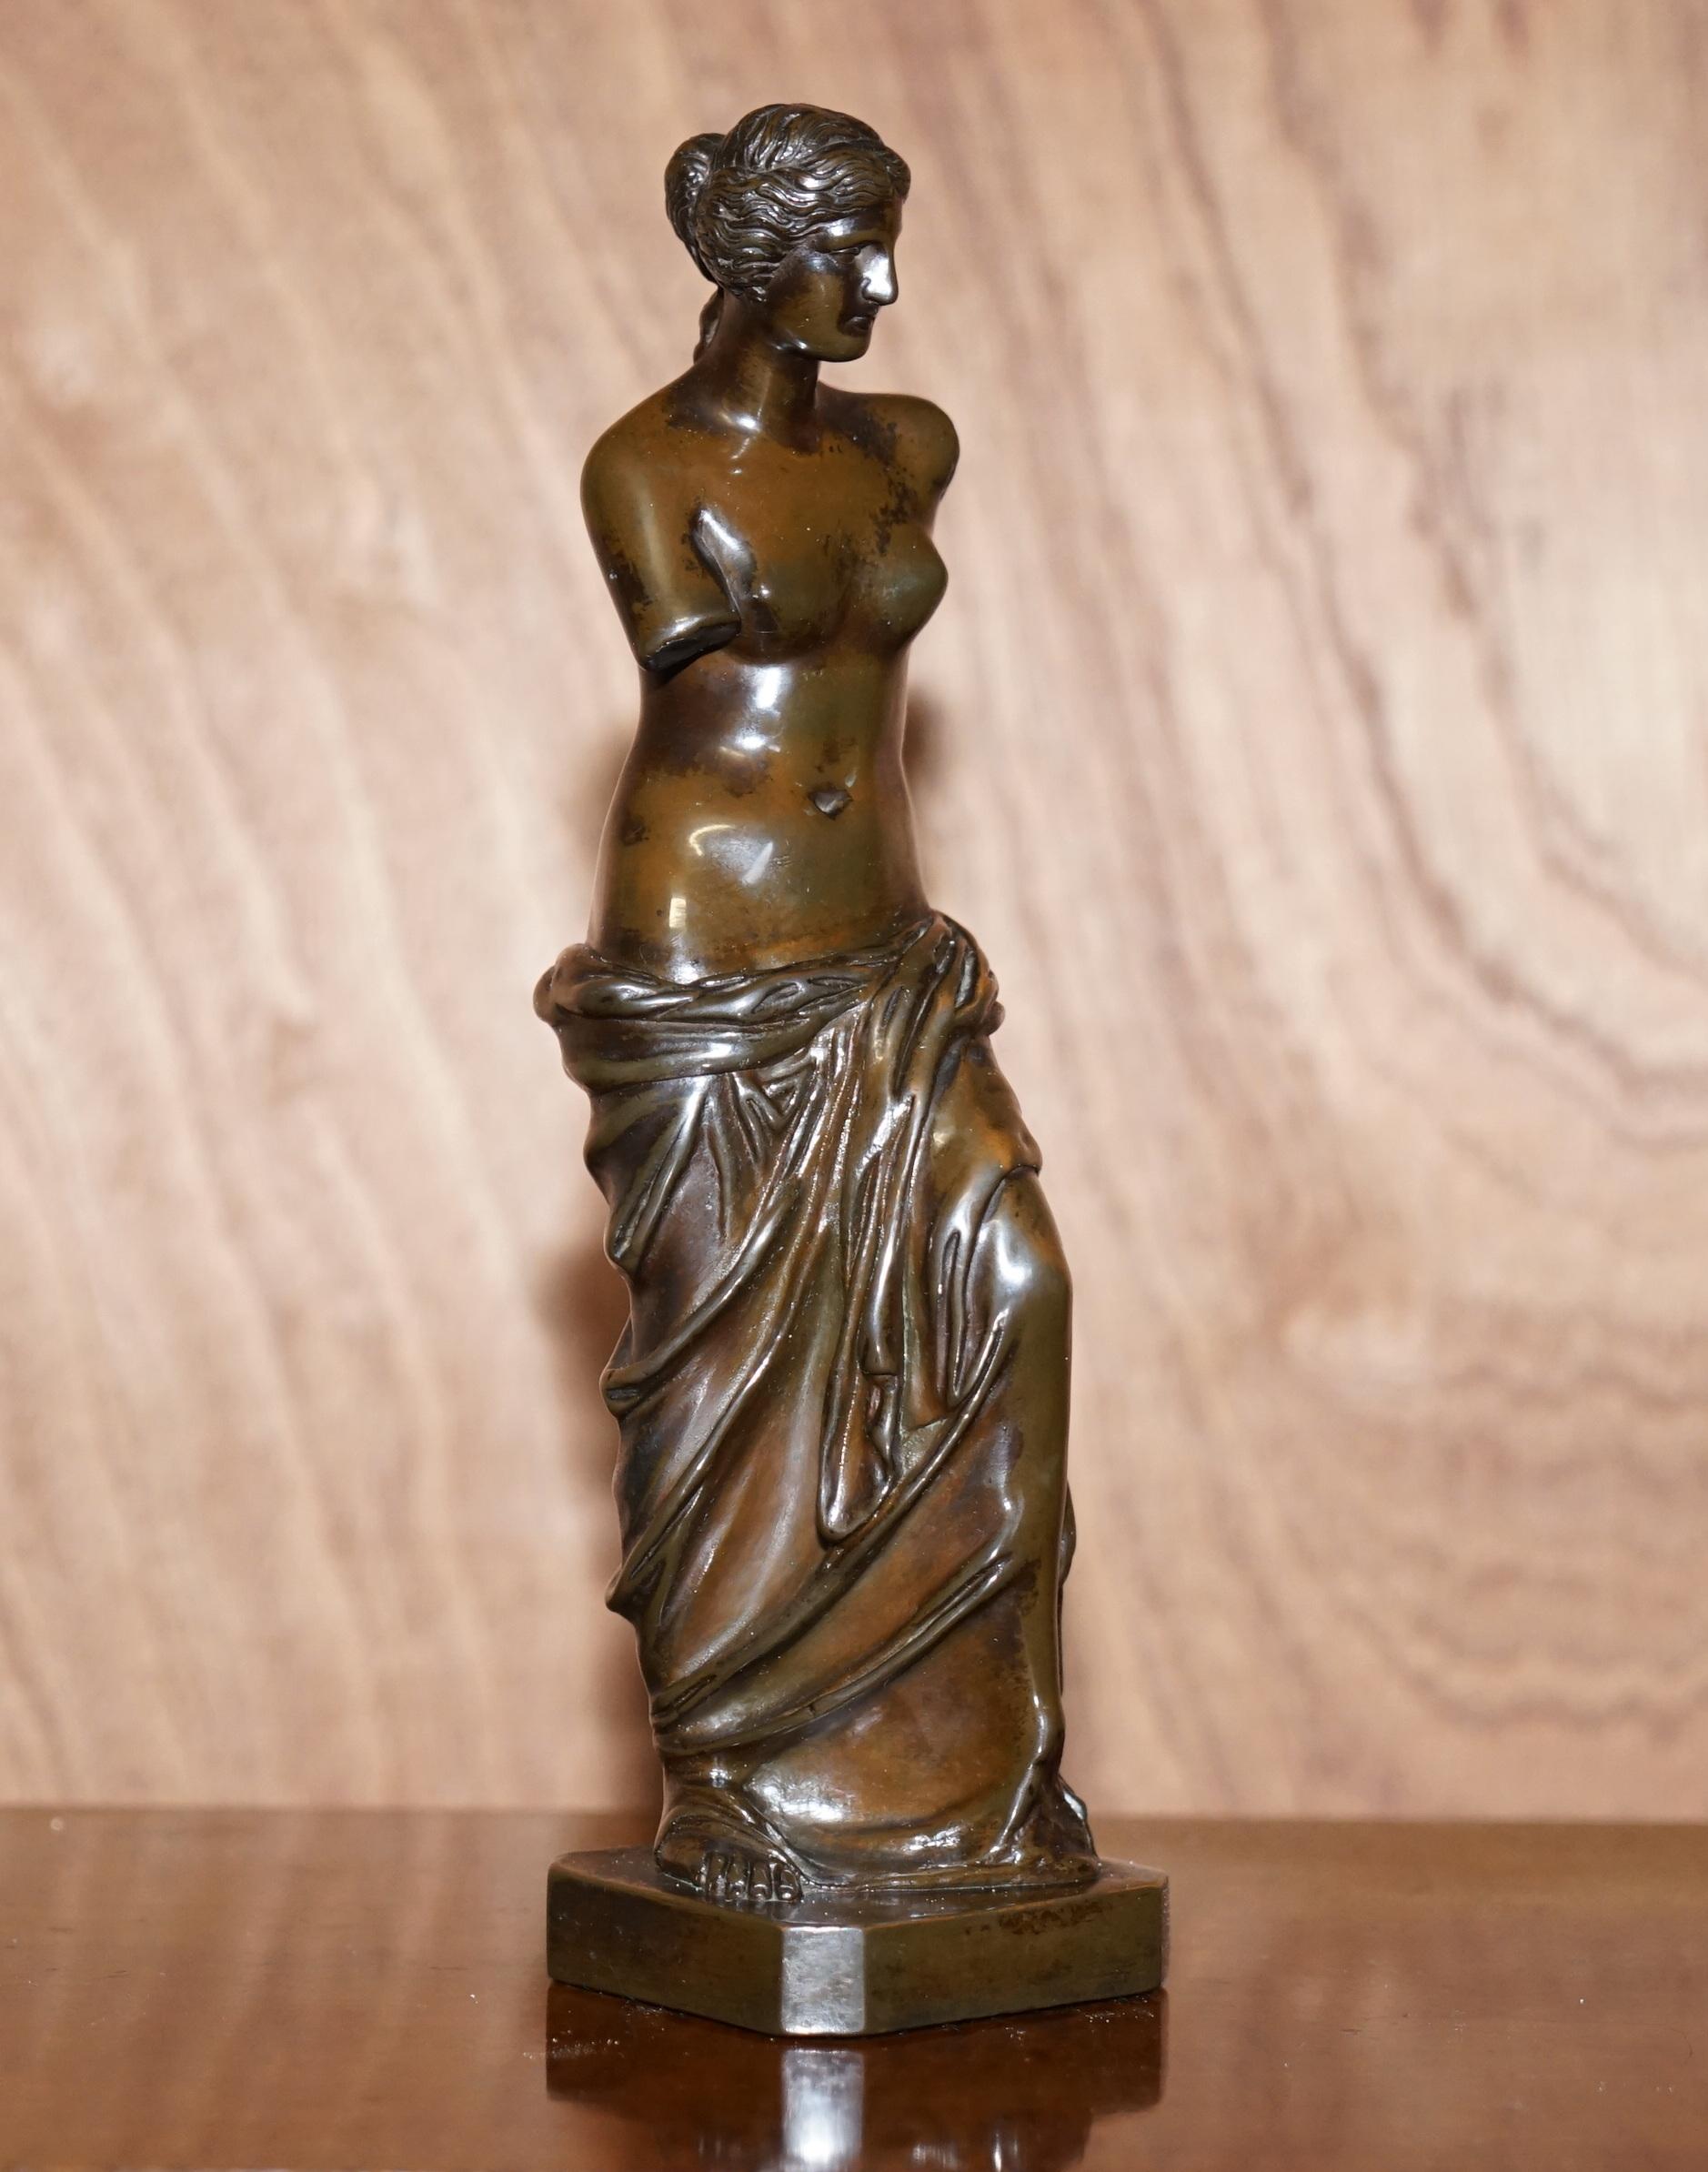 We are delighted to offer for sale this stunning late 19th century Italian grand tour Venus De Milo statue 

A very good looking and decorative piece that look expensive and important in any setting

These pieces were purchased by young